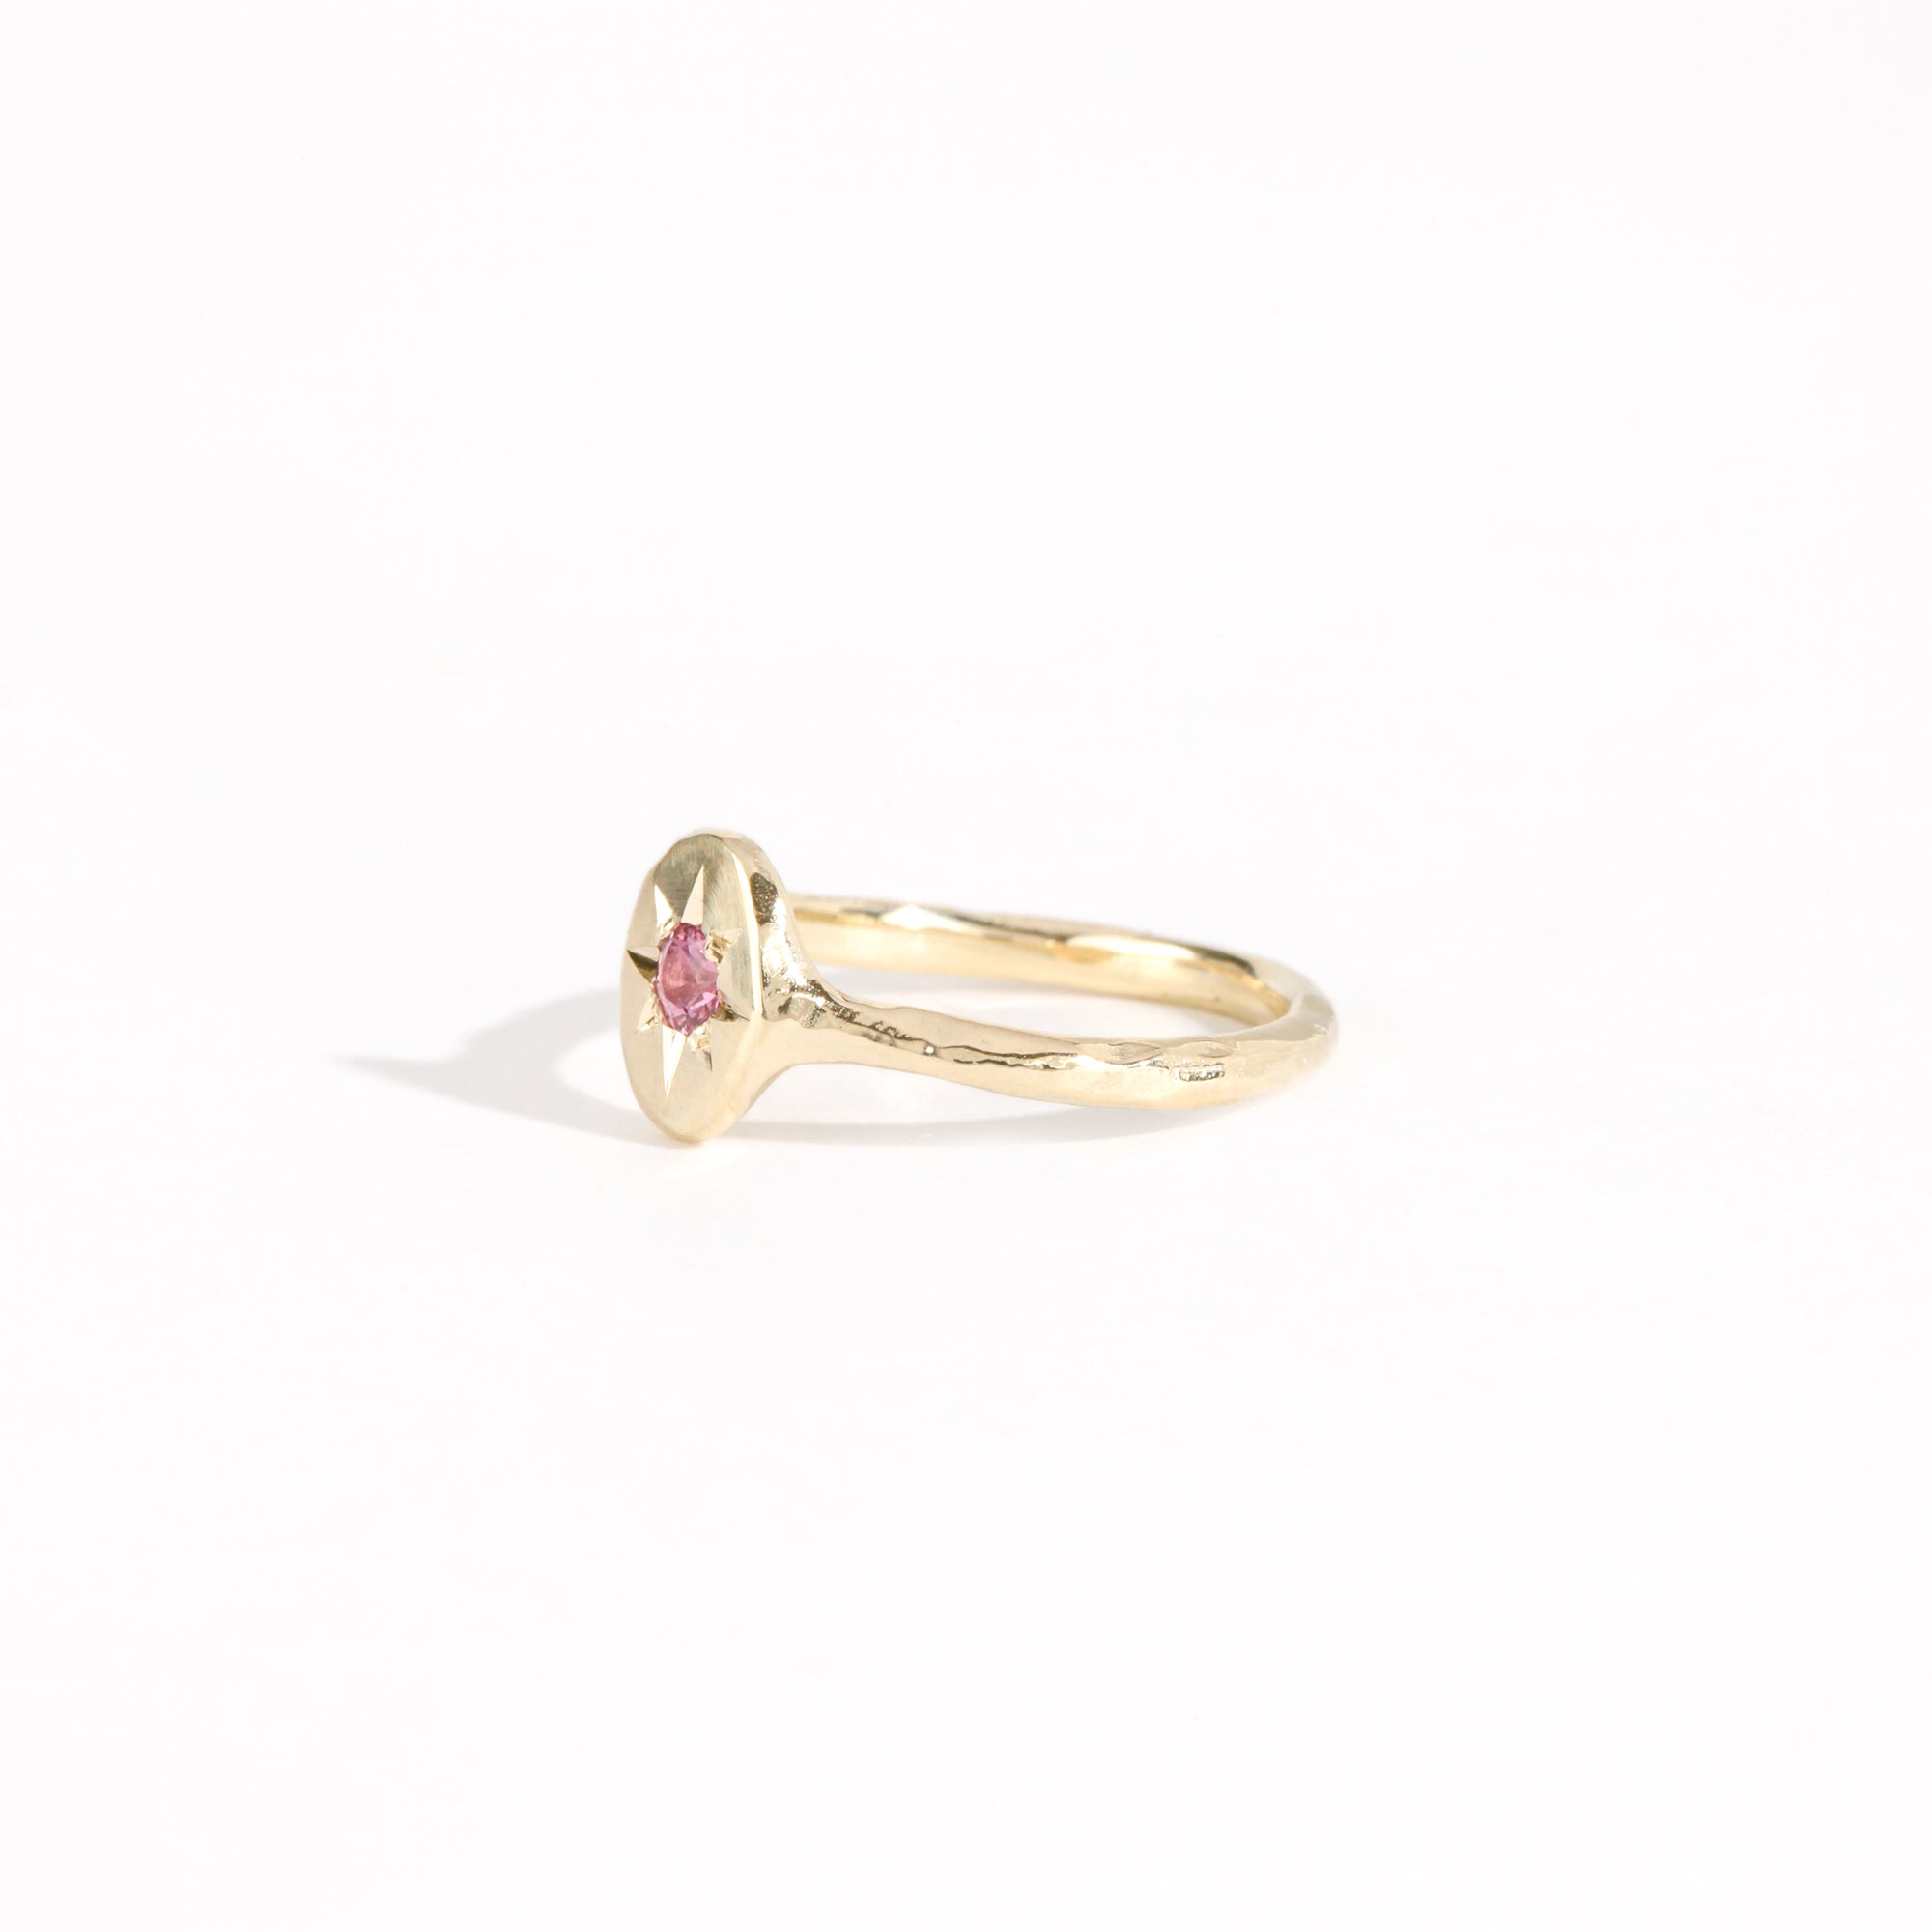 9ct yellow gold signet ring with star set pink sapphire in centre. Bespoke and handmade in Melbourne by Black Finch Jewellery